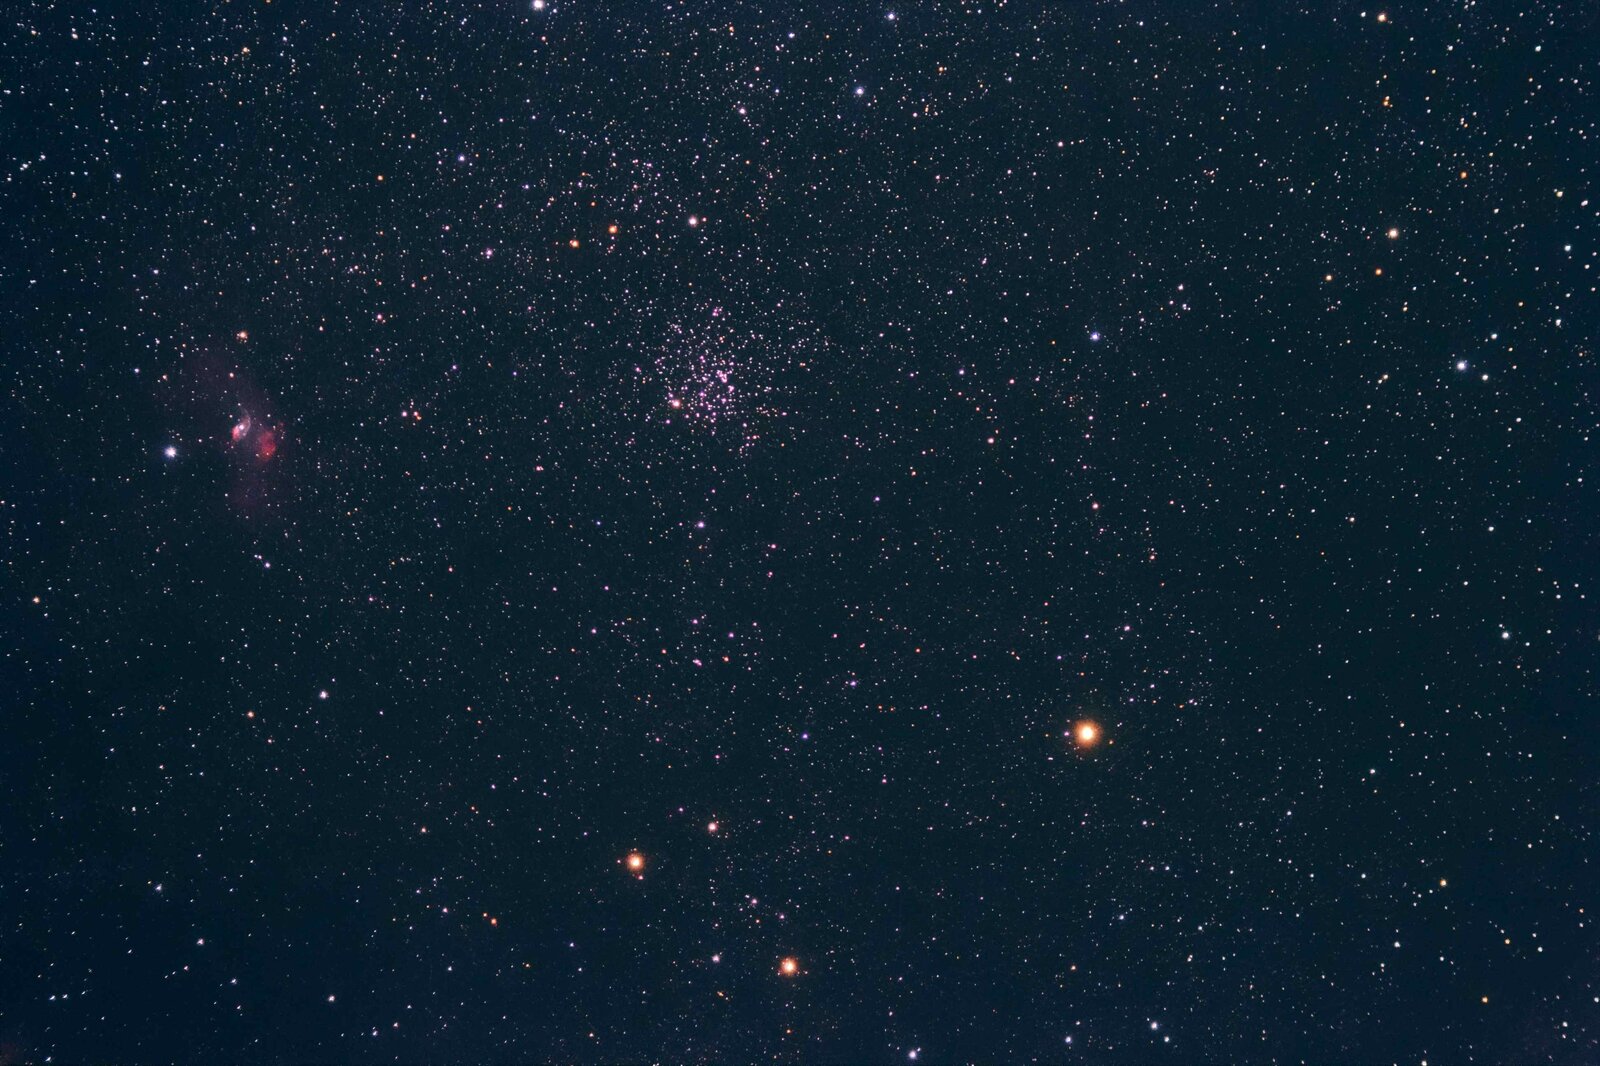 The Bubble Nebula and open cluster M52 in Cassiopeia